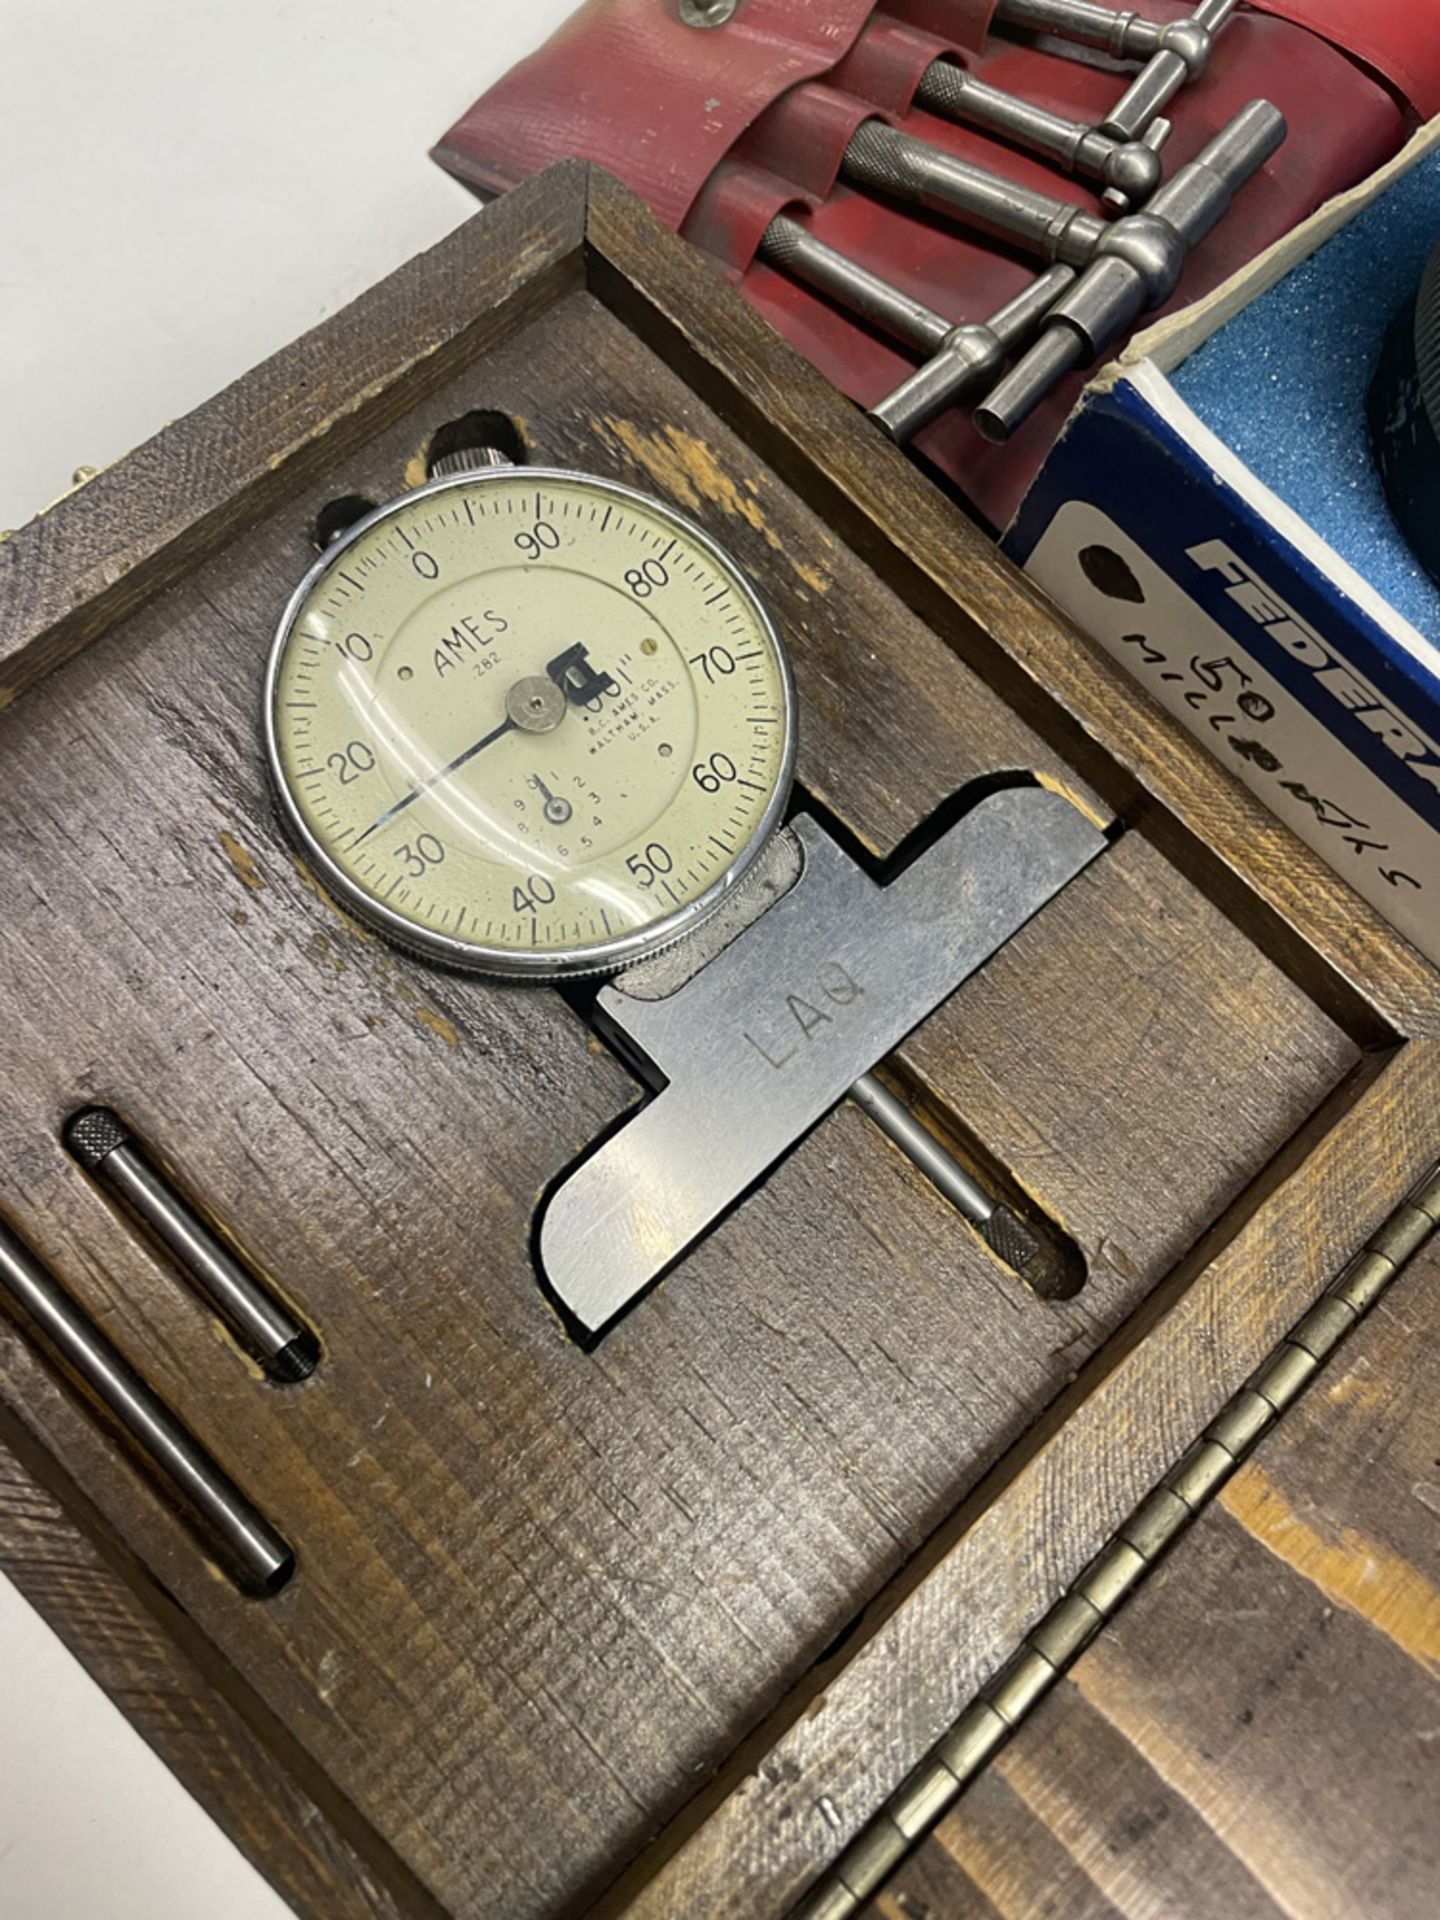 Lot including: 2-Federal .0001" Gages, Gage Stand, 1-Ames Gage in Wood Box, 2- - Image 2 of 3